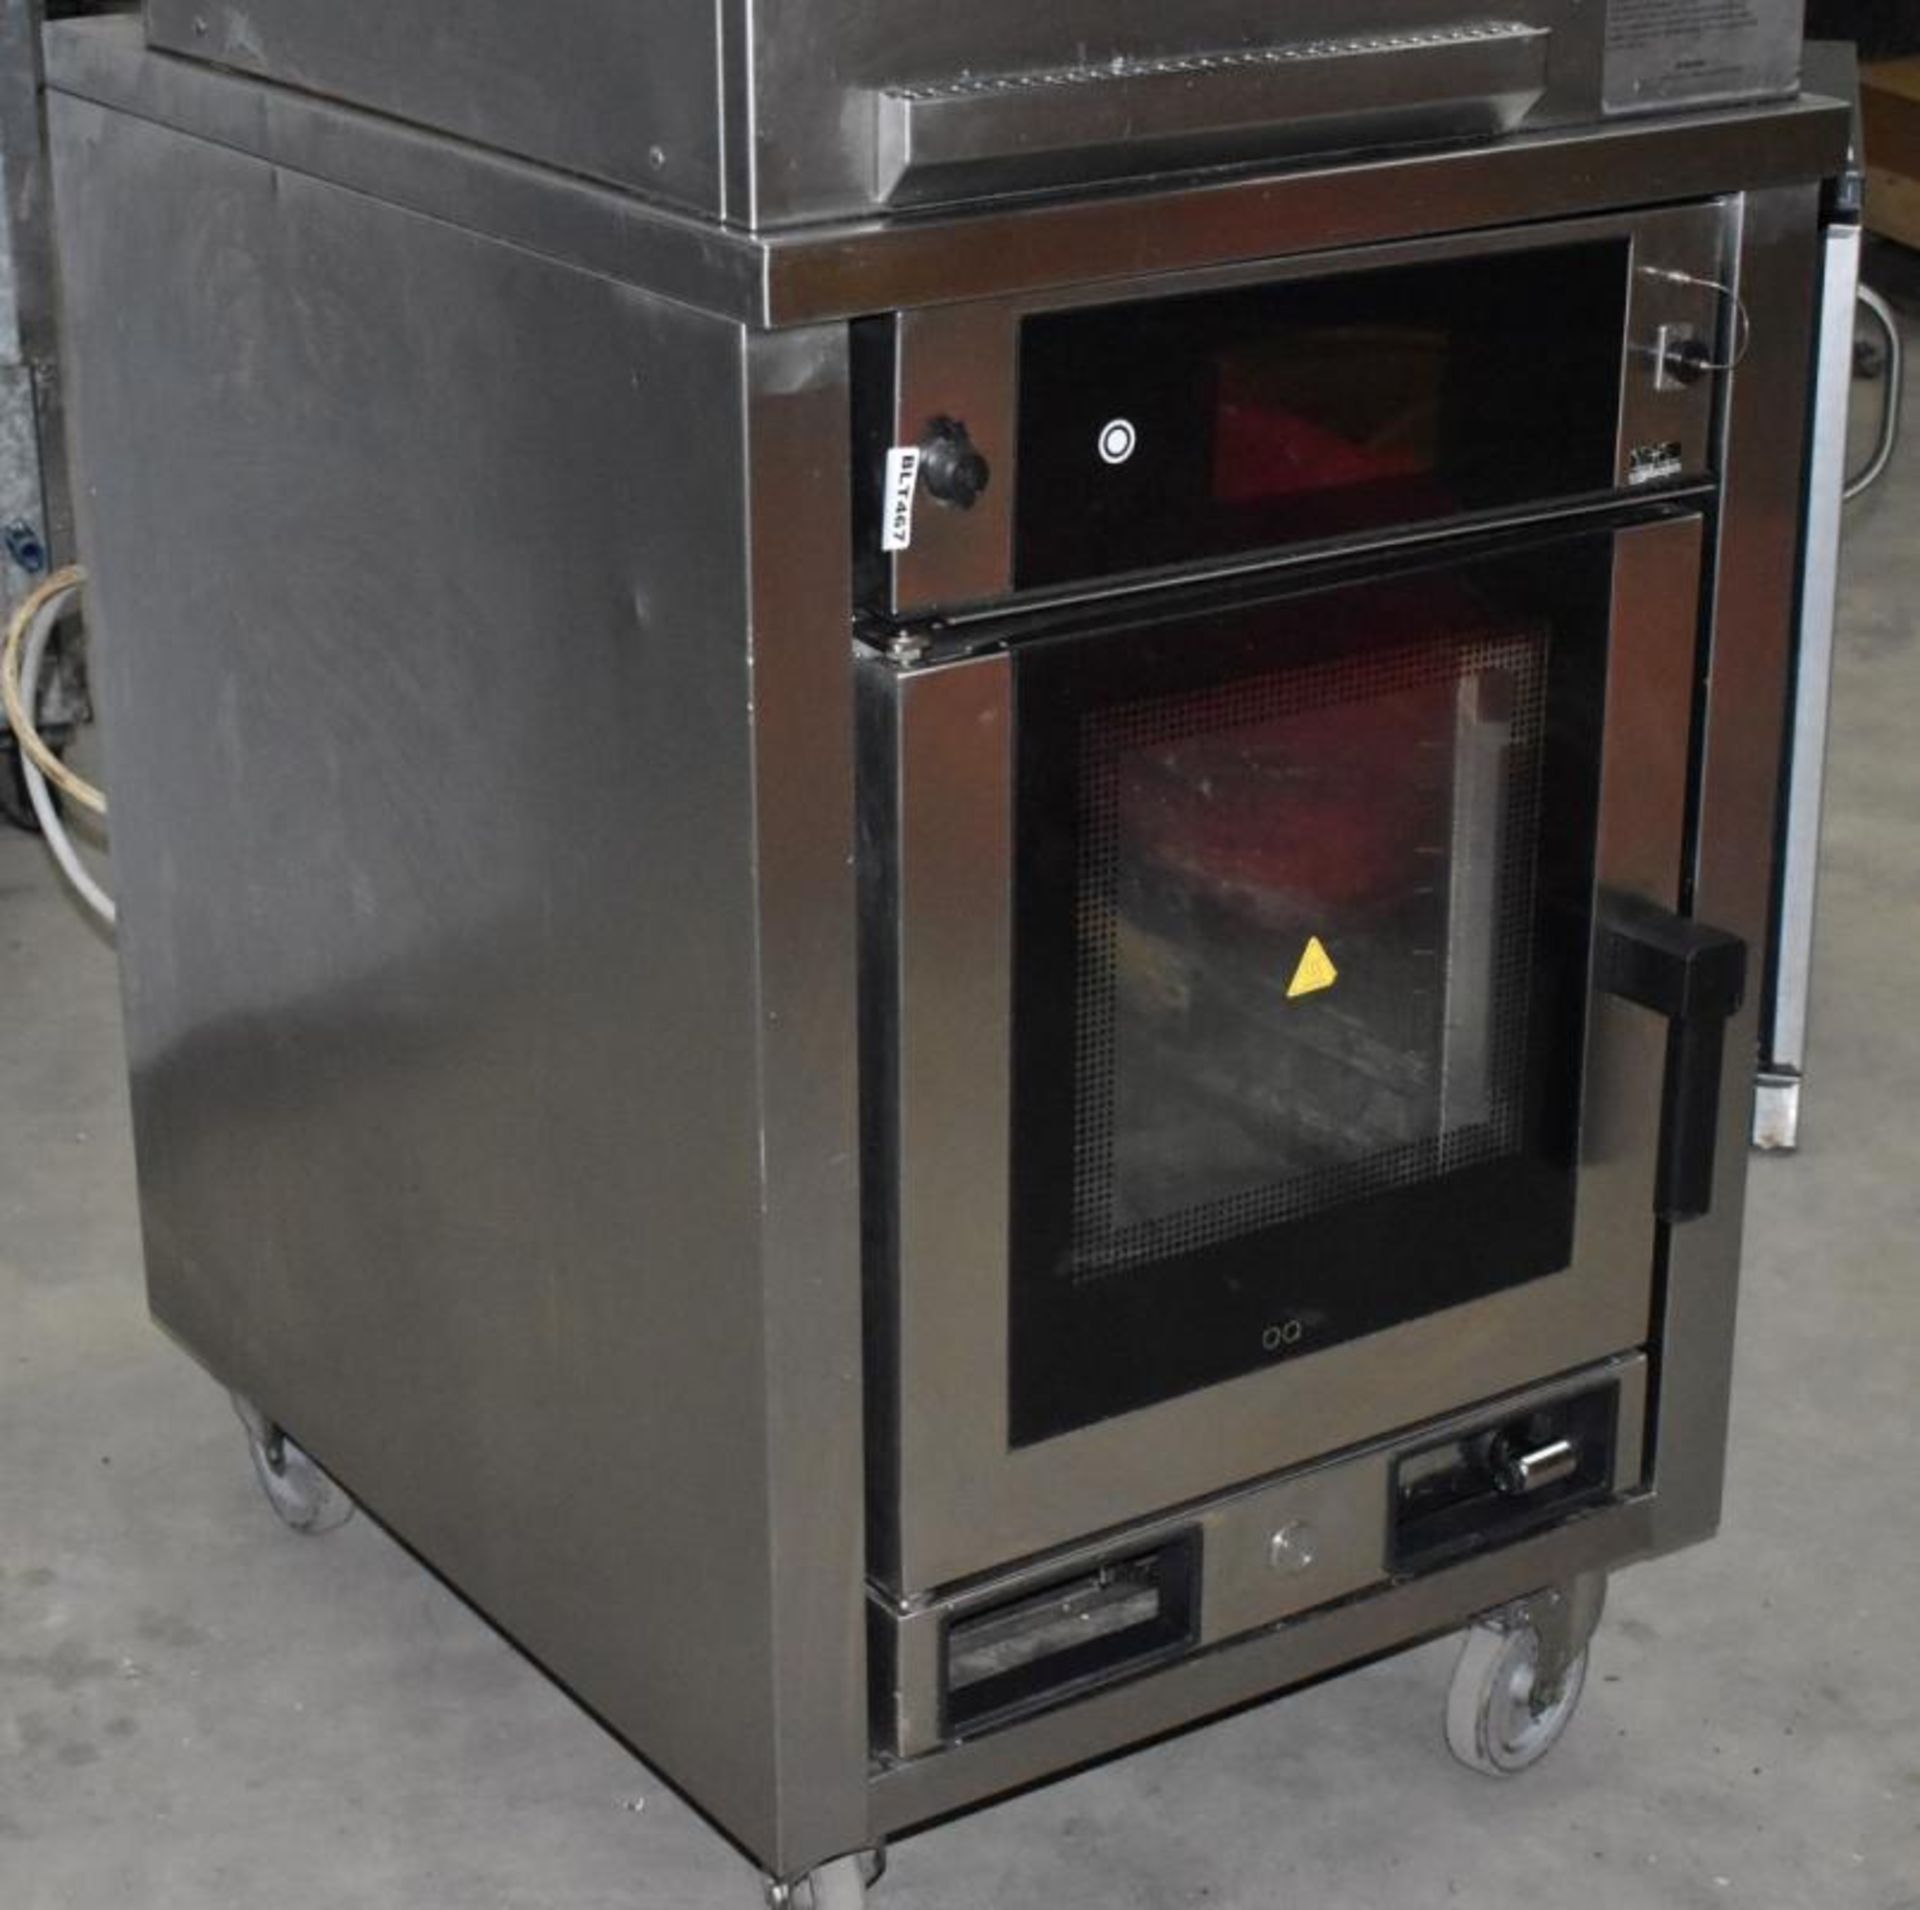 1 x Moduline Cook and Hold Convection Oven and Pressure Steamer Cooker - Features USB Connection, To - Image 2 of 16